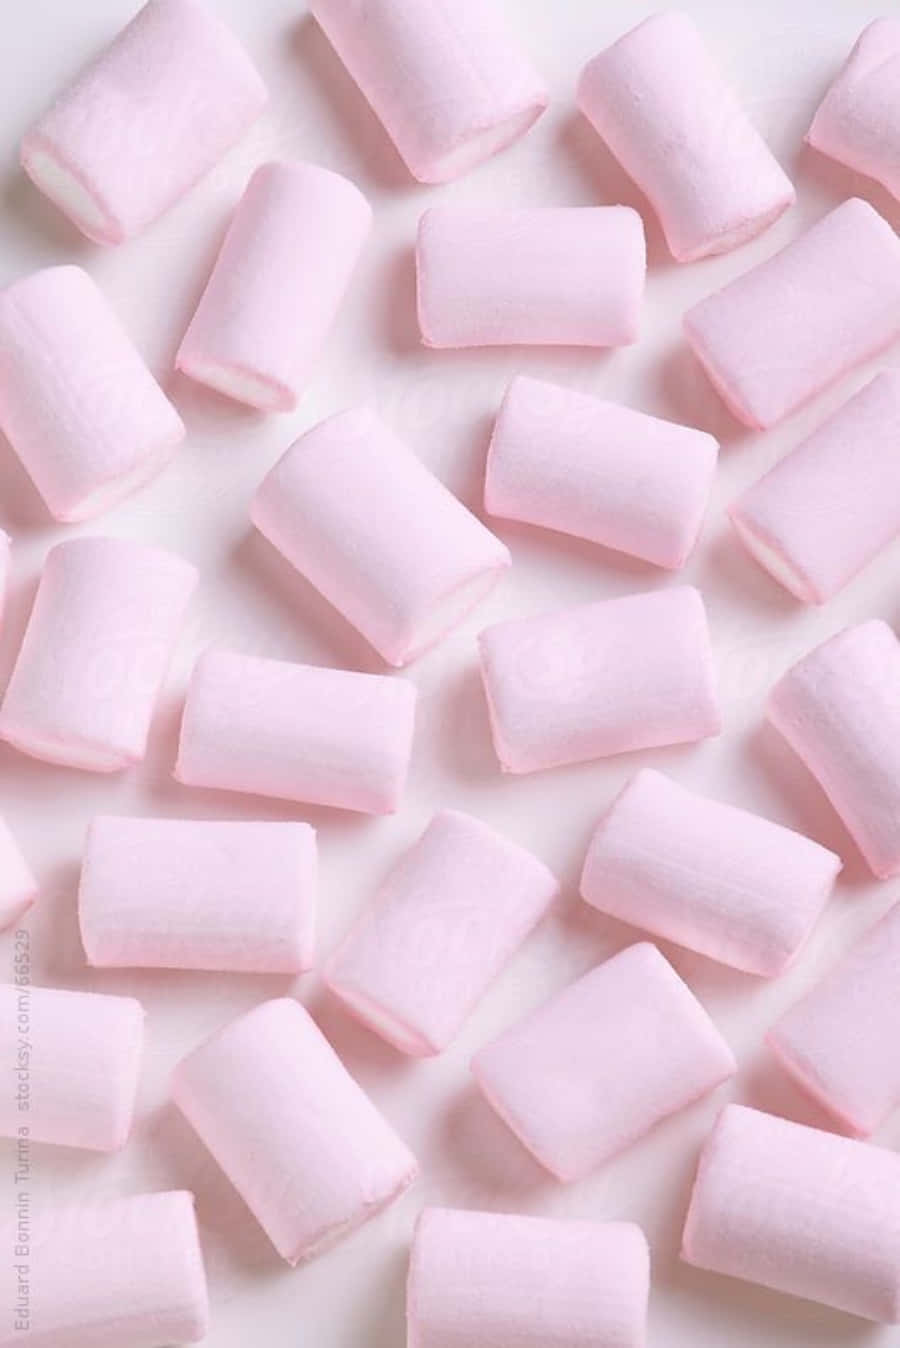 Soft and fluffy marshmallows - delightfully sweet!